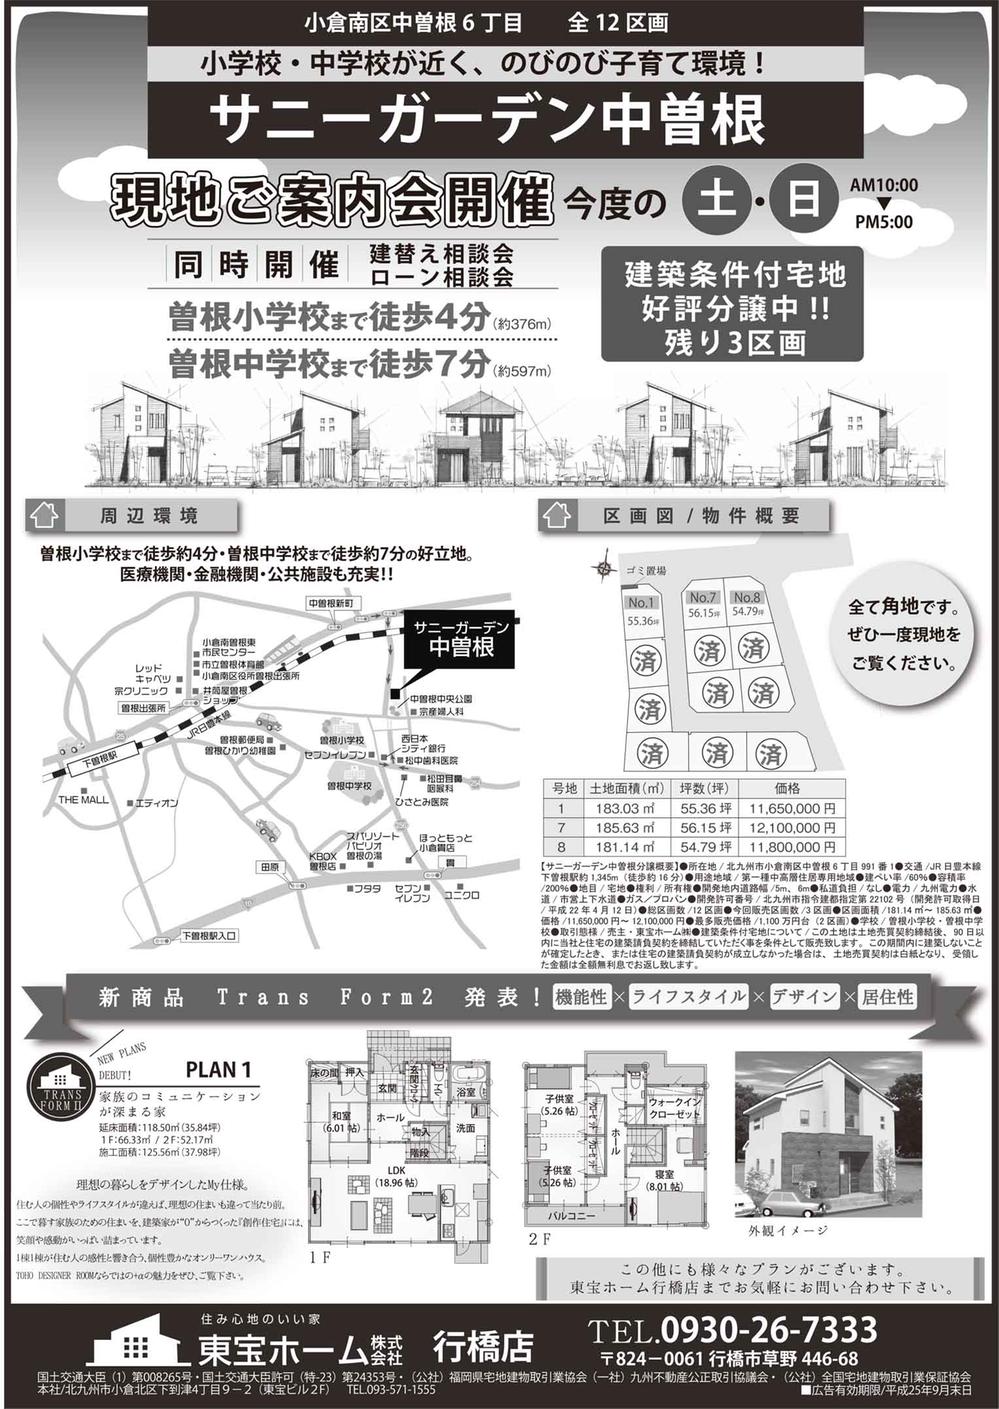 Other. It will hold a local guidance be held at Sunny Garden Nakasone. Please come by all means on this occasion. 